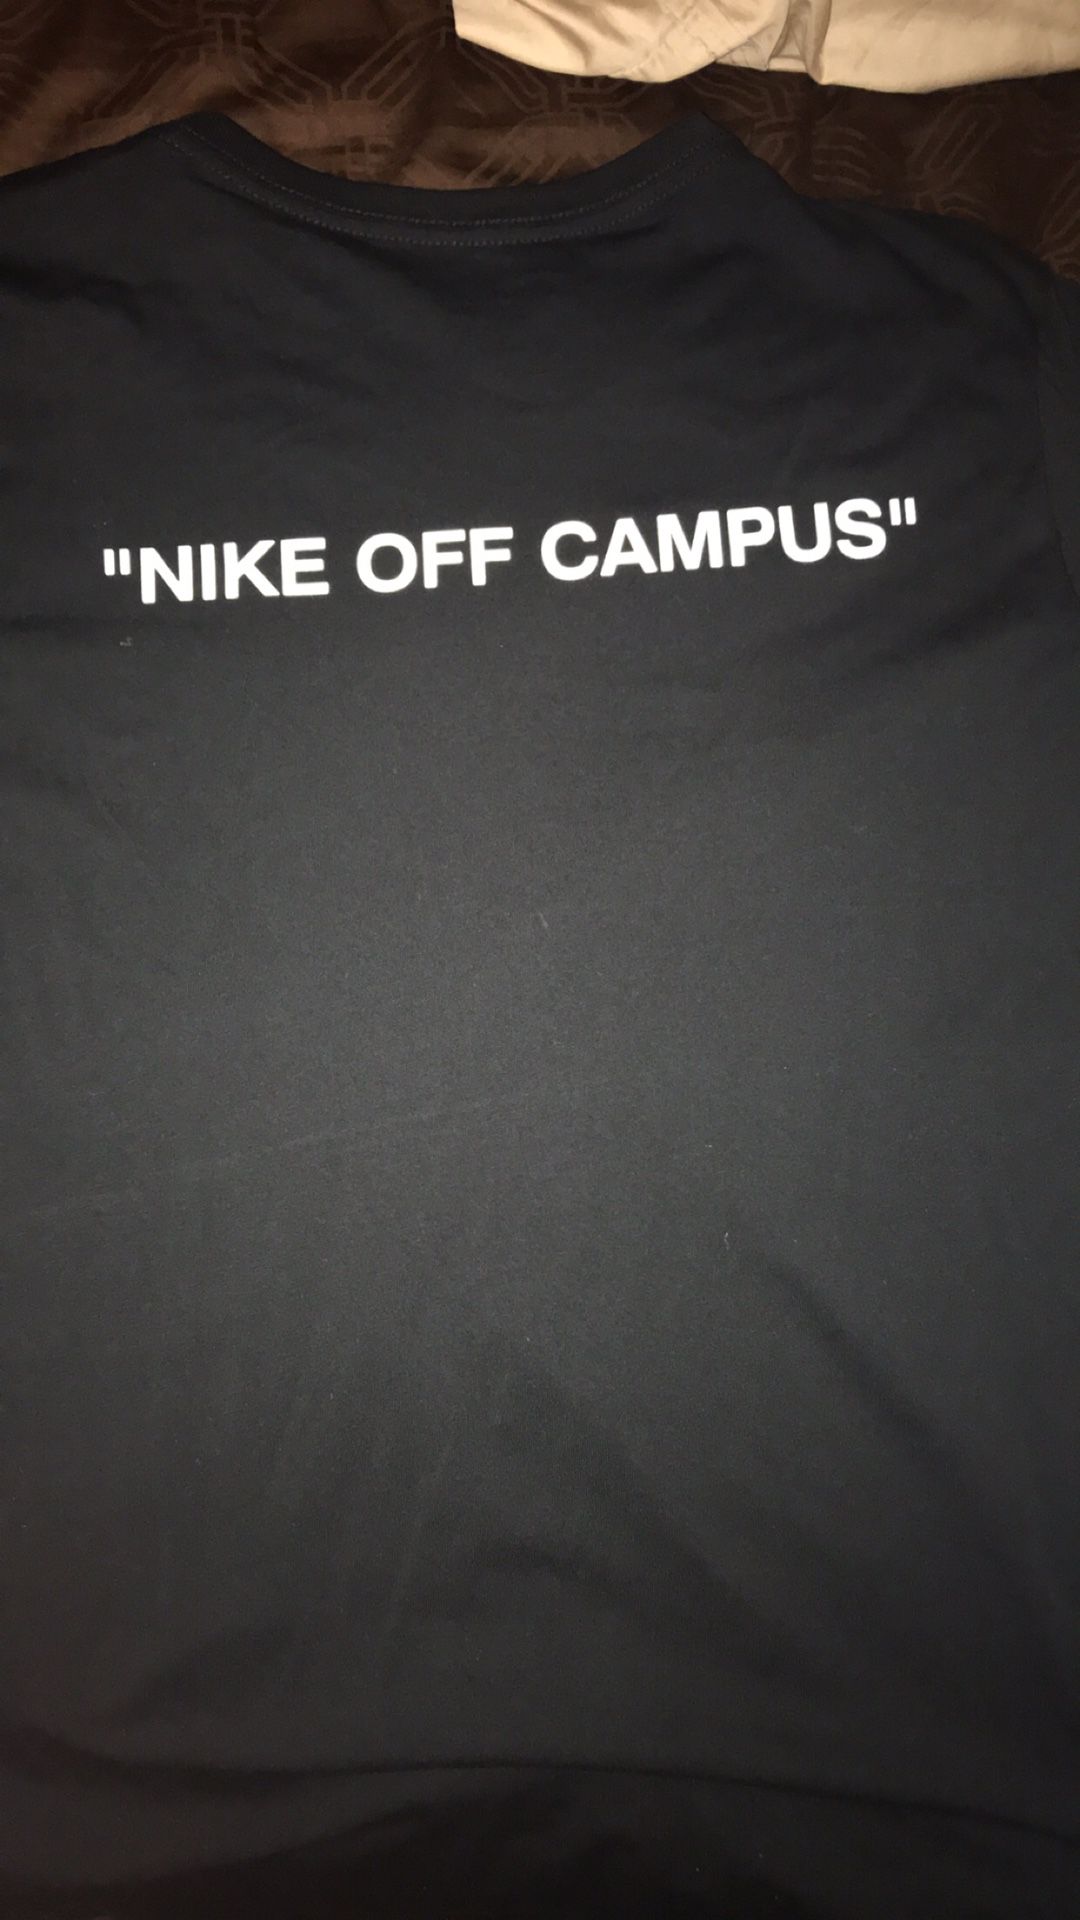 Nike Off Campus Tee (Black) for in Anaheim, CA - OfferUp